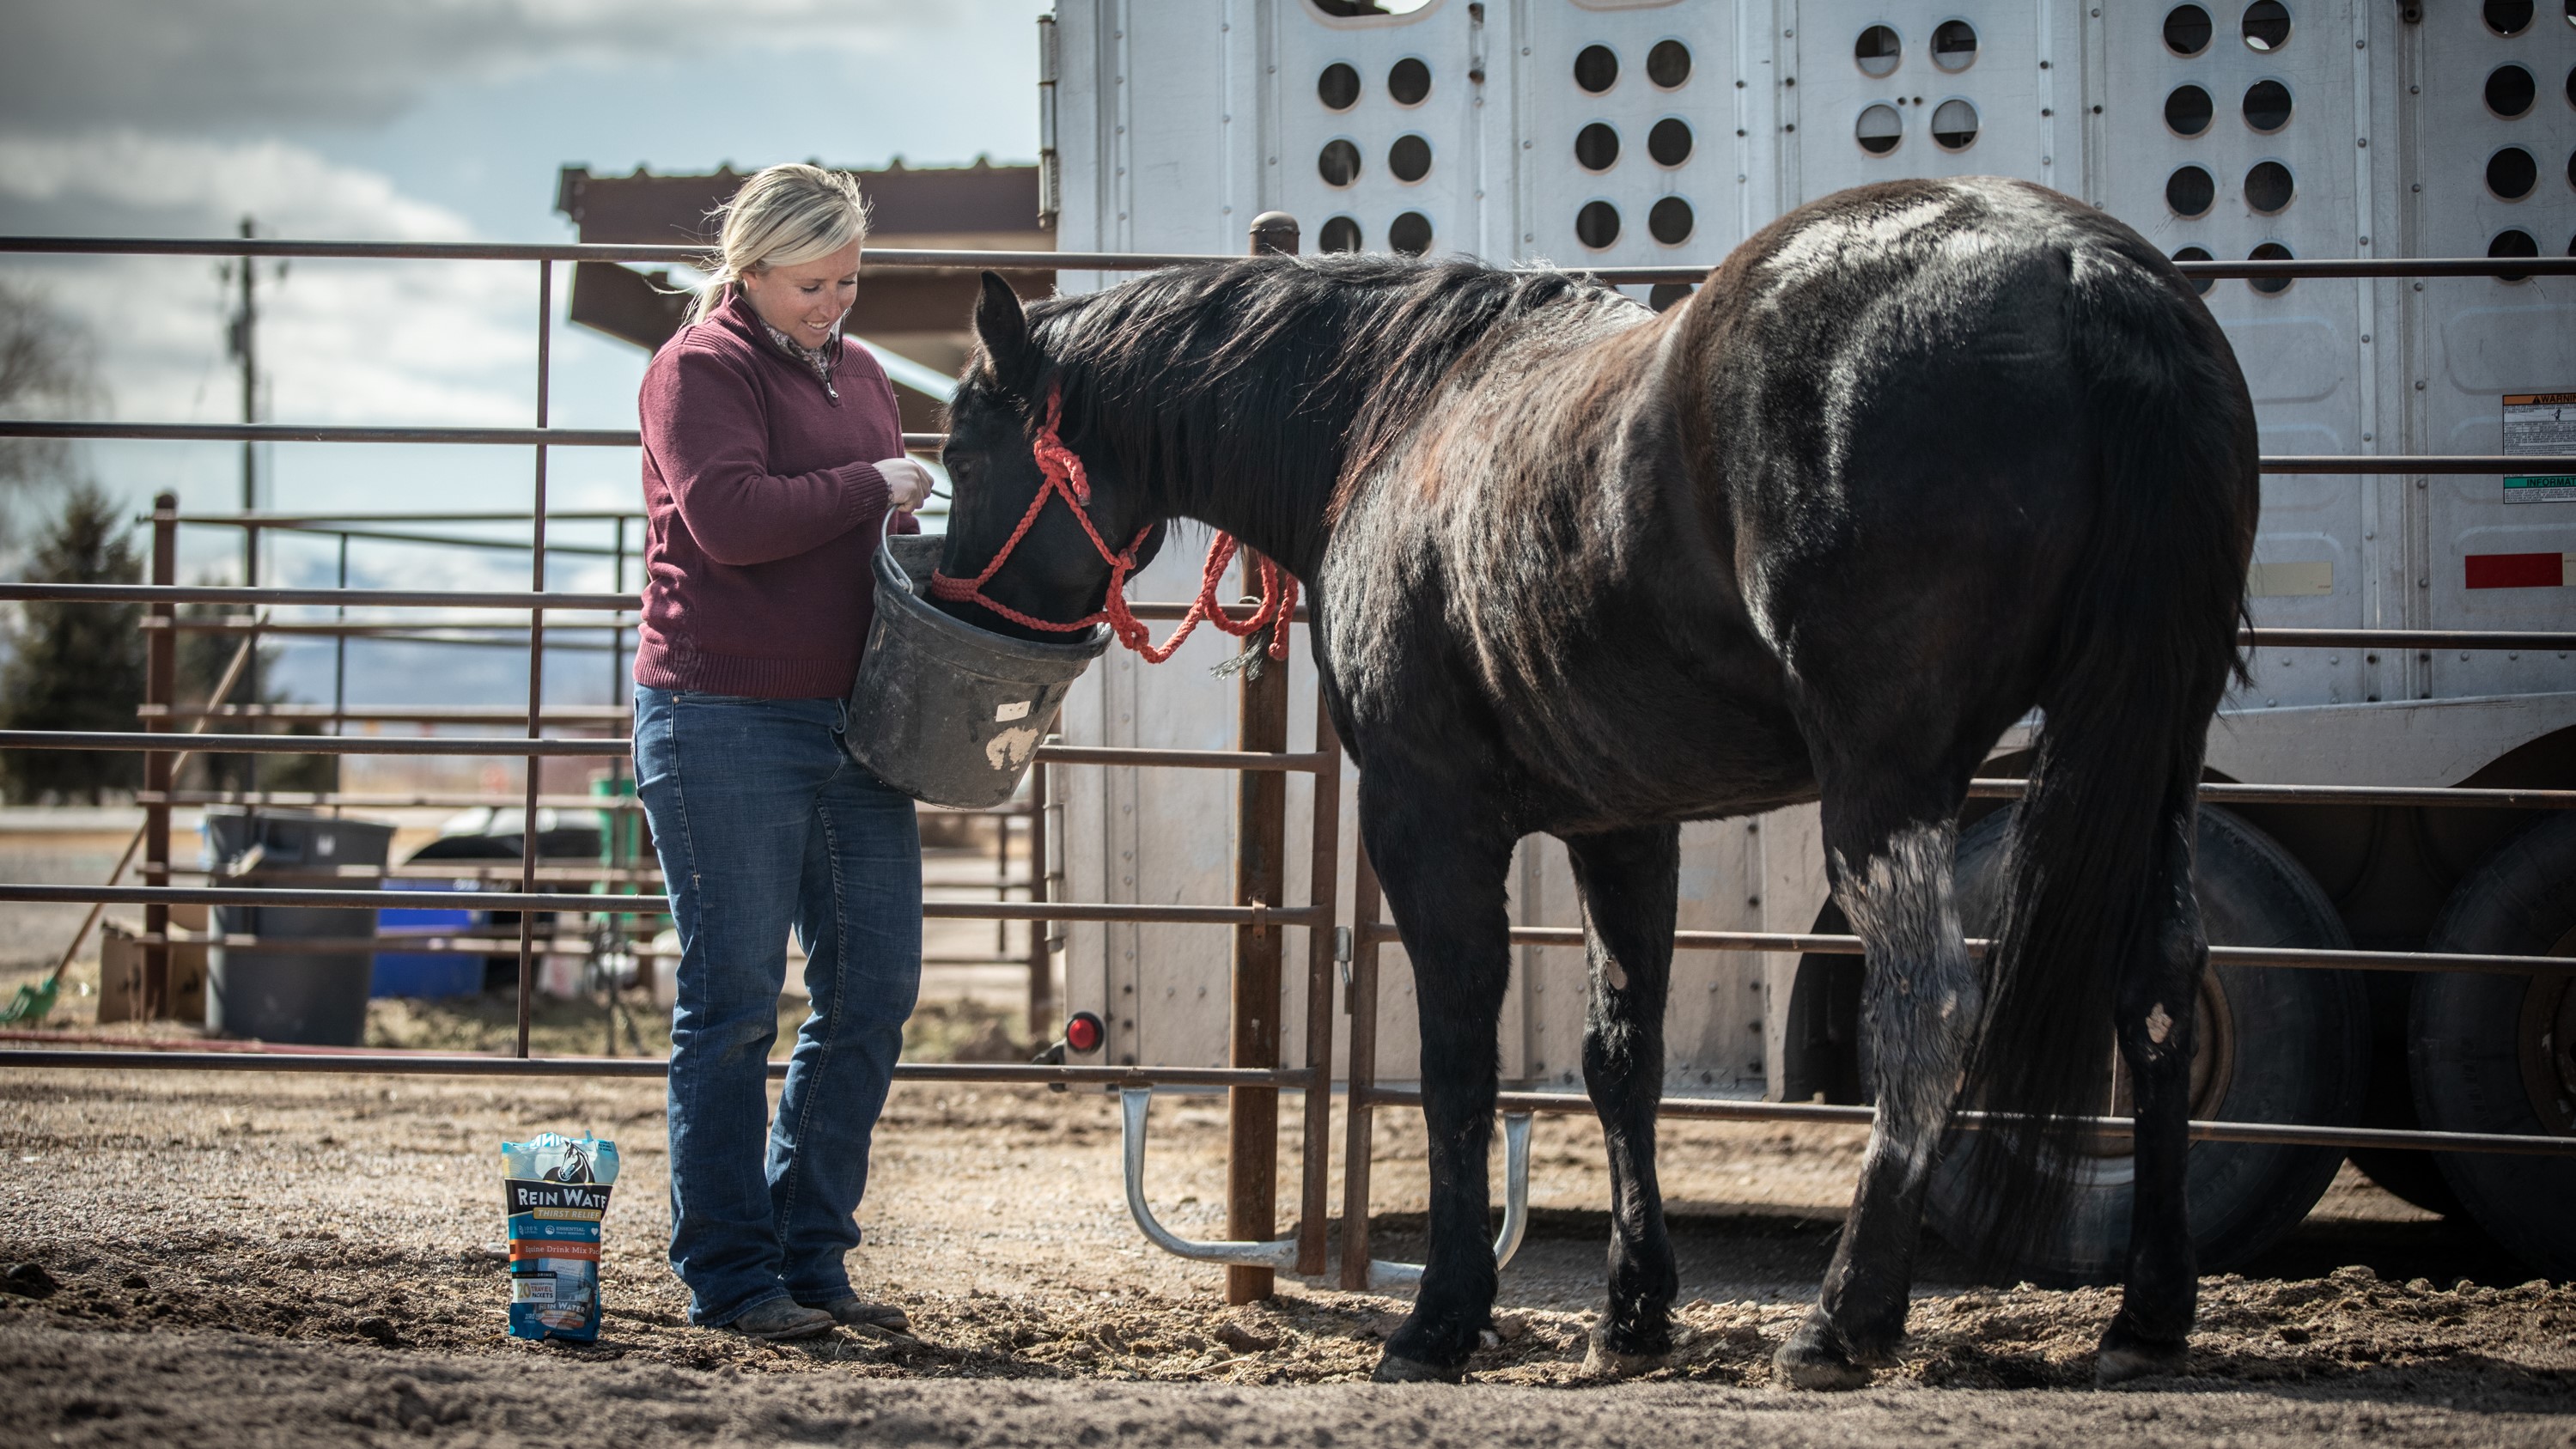 A Redmond Story: How Alyssa Got Two New Horses to Drink More Water